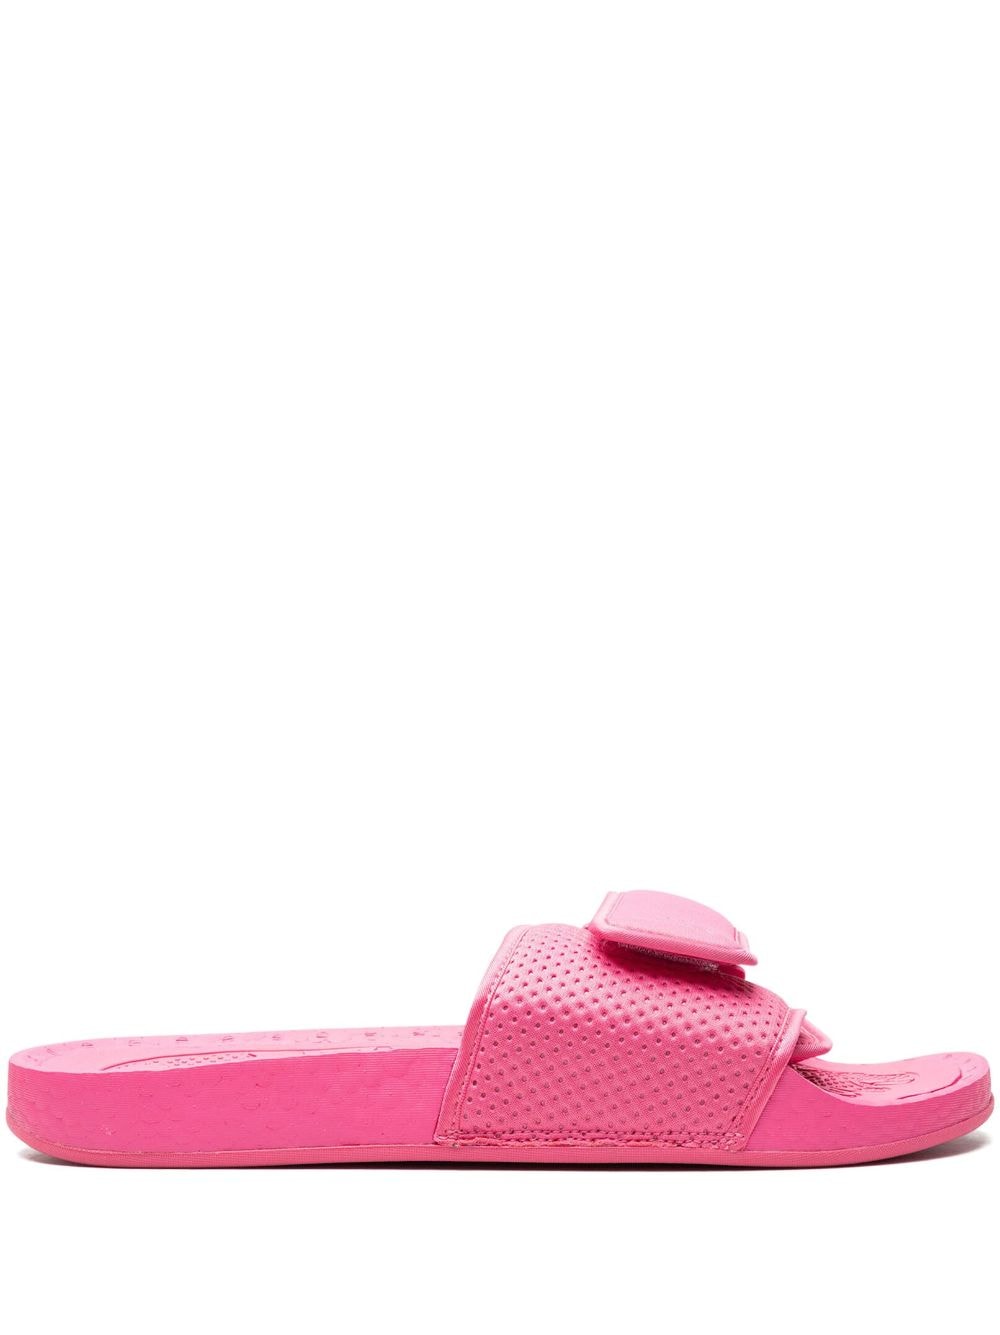 Adidas Boost badslippers Roze